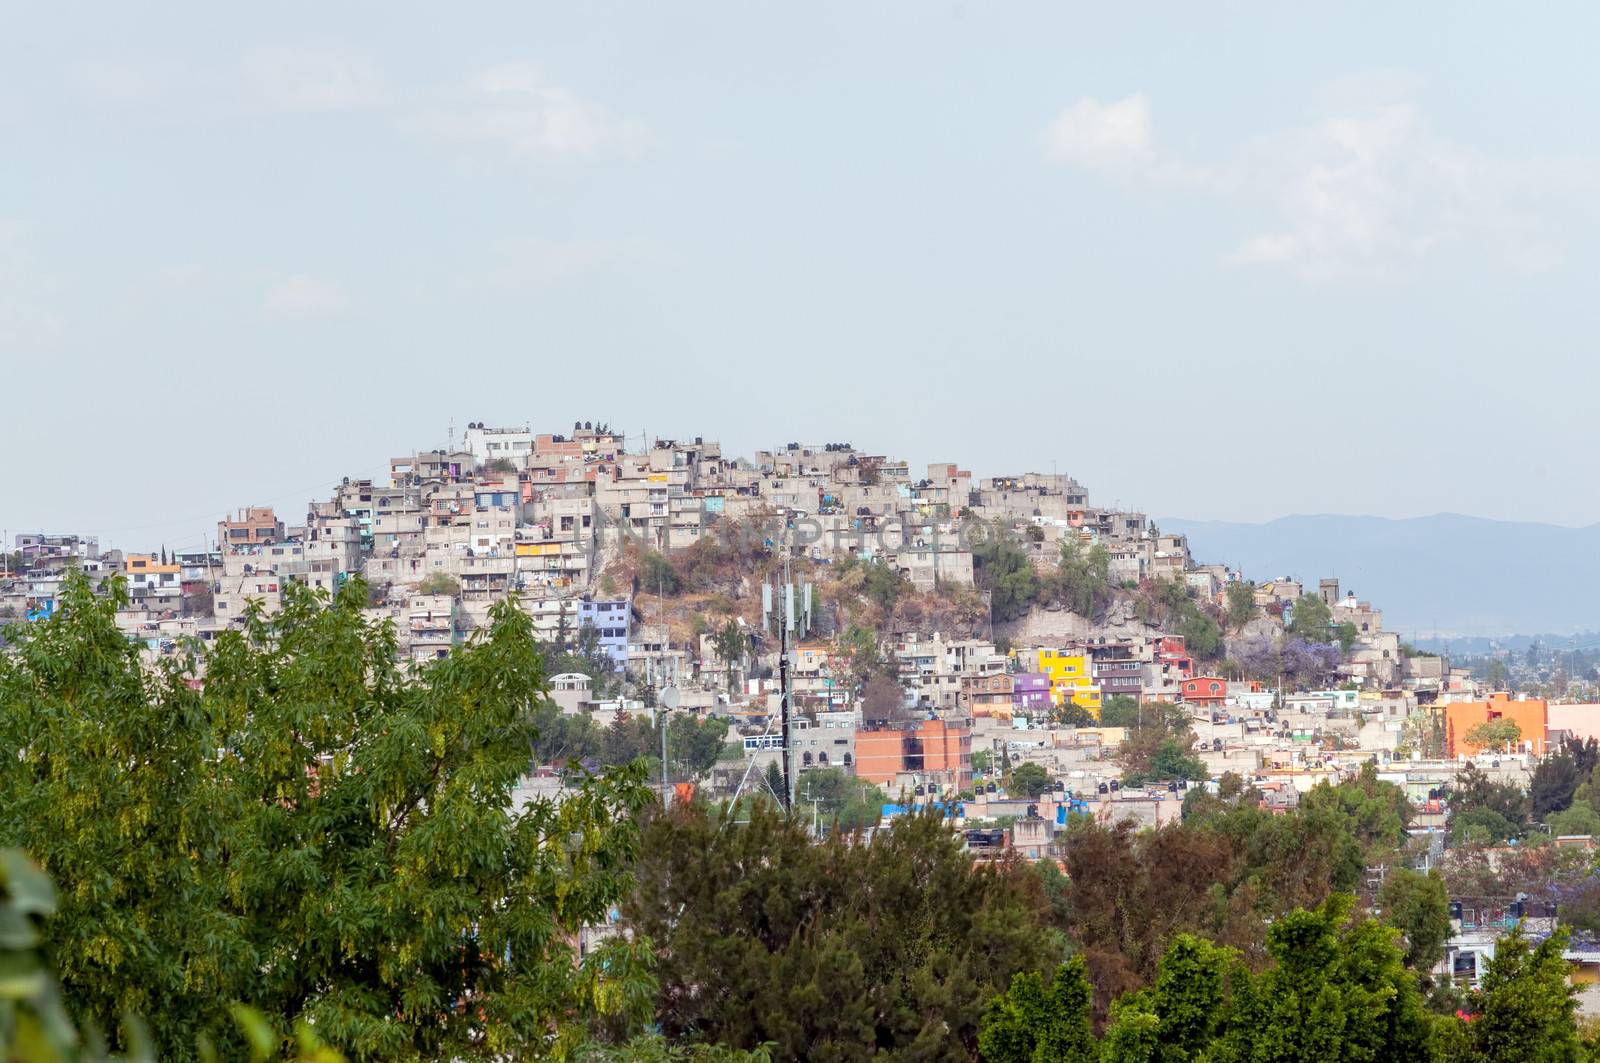 Slum on top of a hill in Mexico City